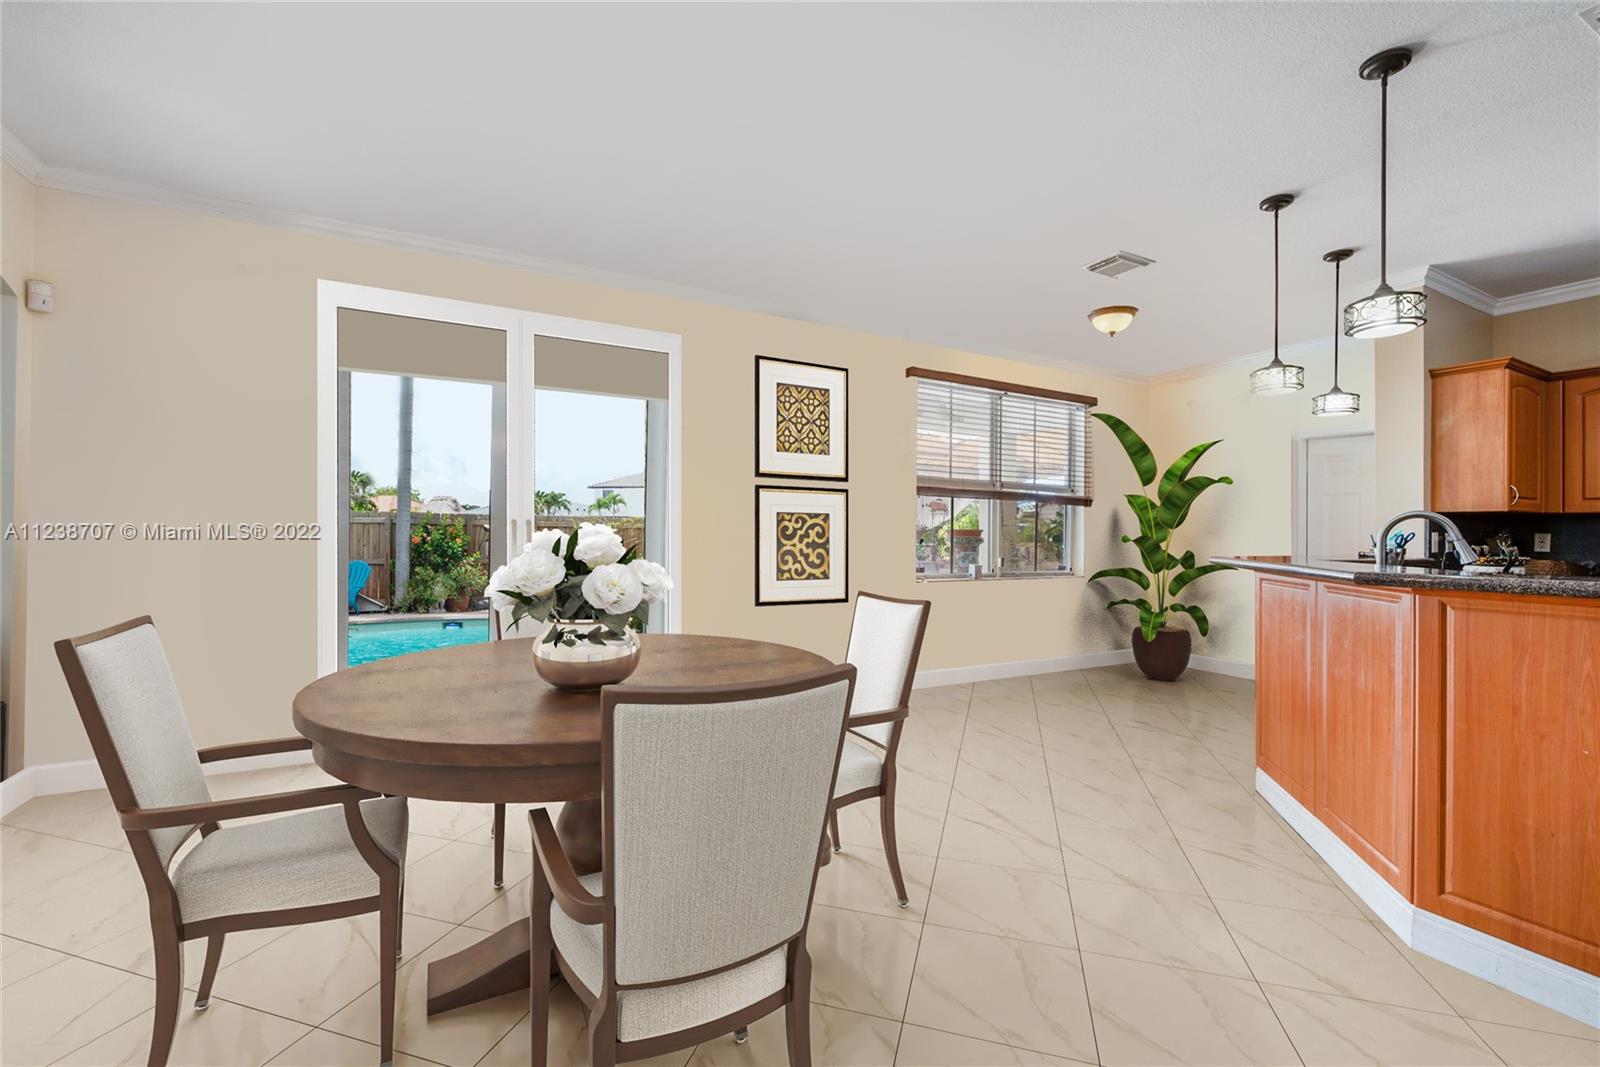 Kitchen with breakfast area - direct view and access to pool/backyard. (staged image)